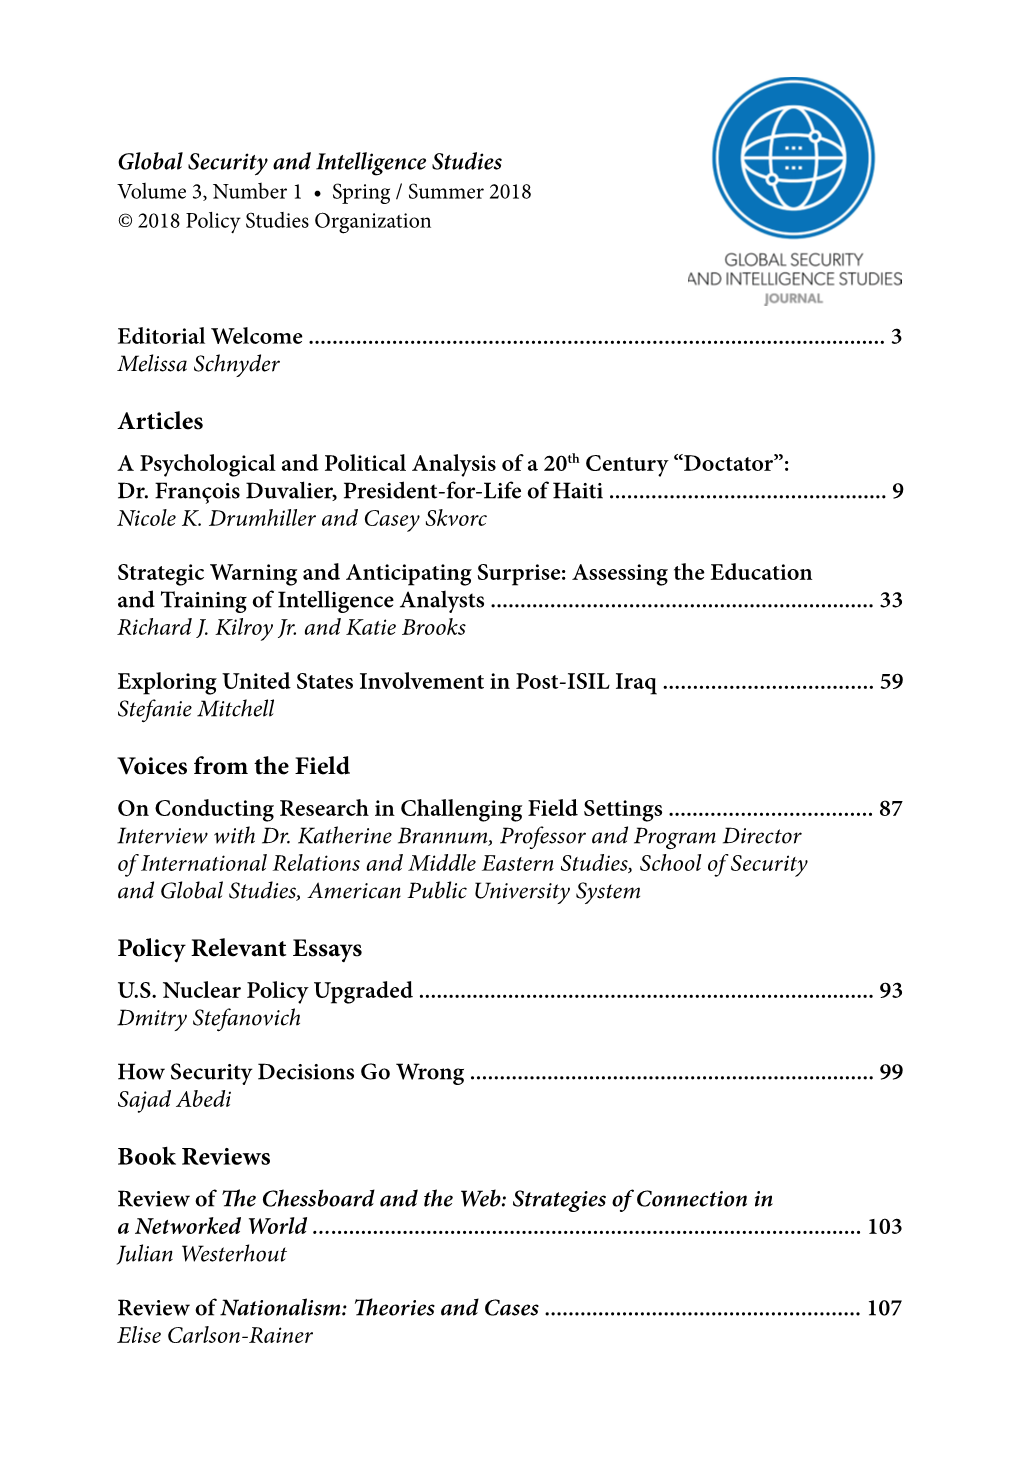 Articles Voices from the Field Policy